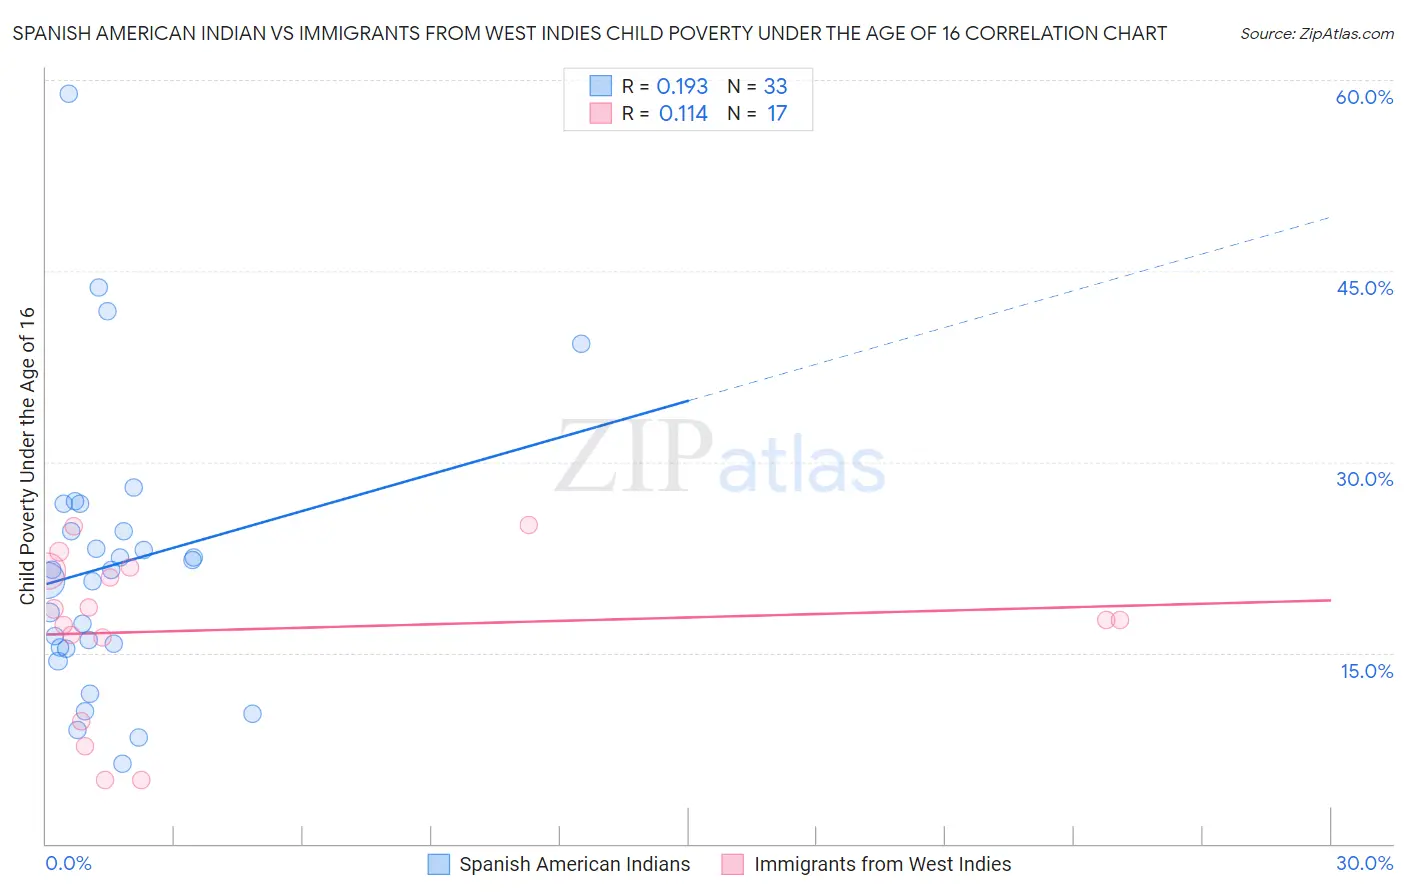 Spanish American Indian vs Immigrants from West Indies Child Poverty Under the Age of 16